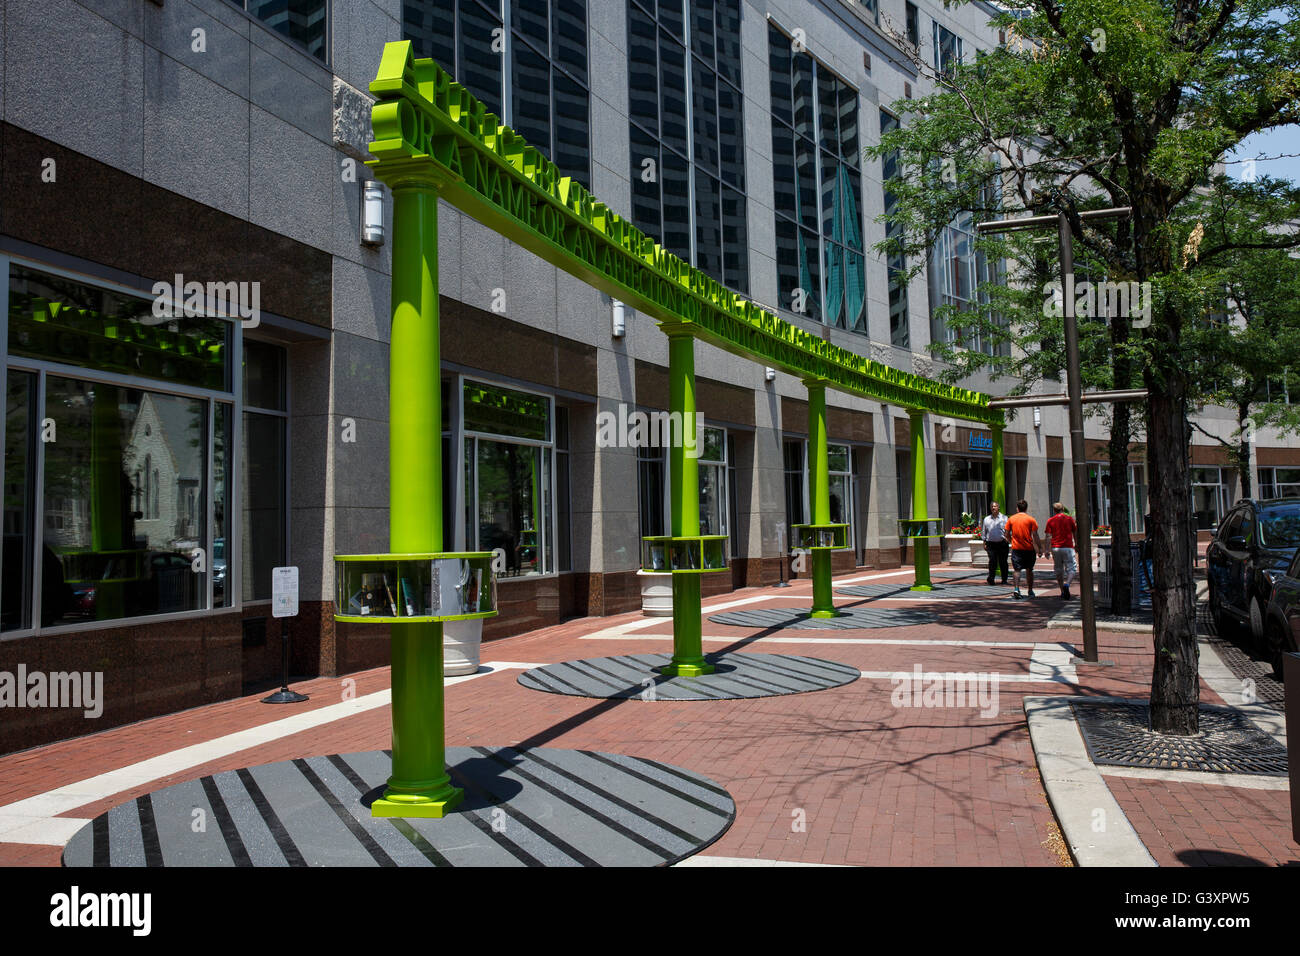 Public library in downtown Indianapolis, Indiana, with public book lending receptacles. Stock Photo